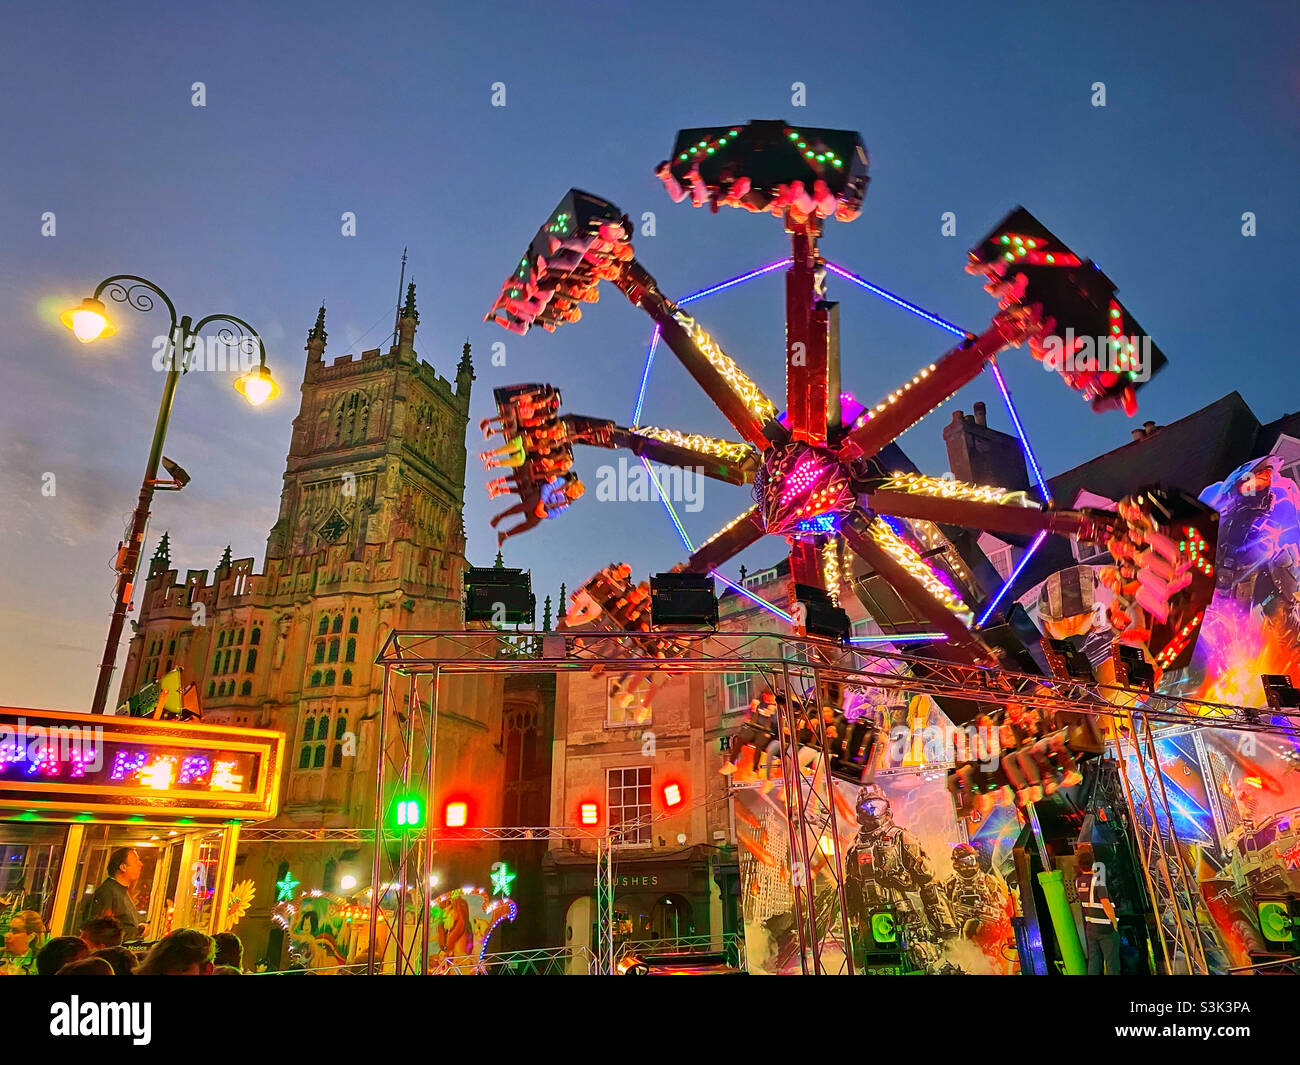 All the fun of an English fairground ride. It’s dusk, so the evening entertainment is about to start. Any fast rotating rides anybody?!! Photo ©️ COLIN HOSKINS. Stock Photo